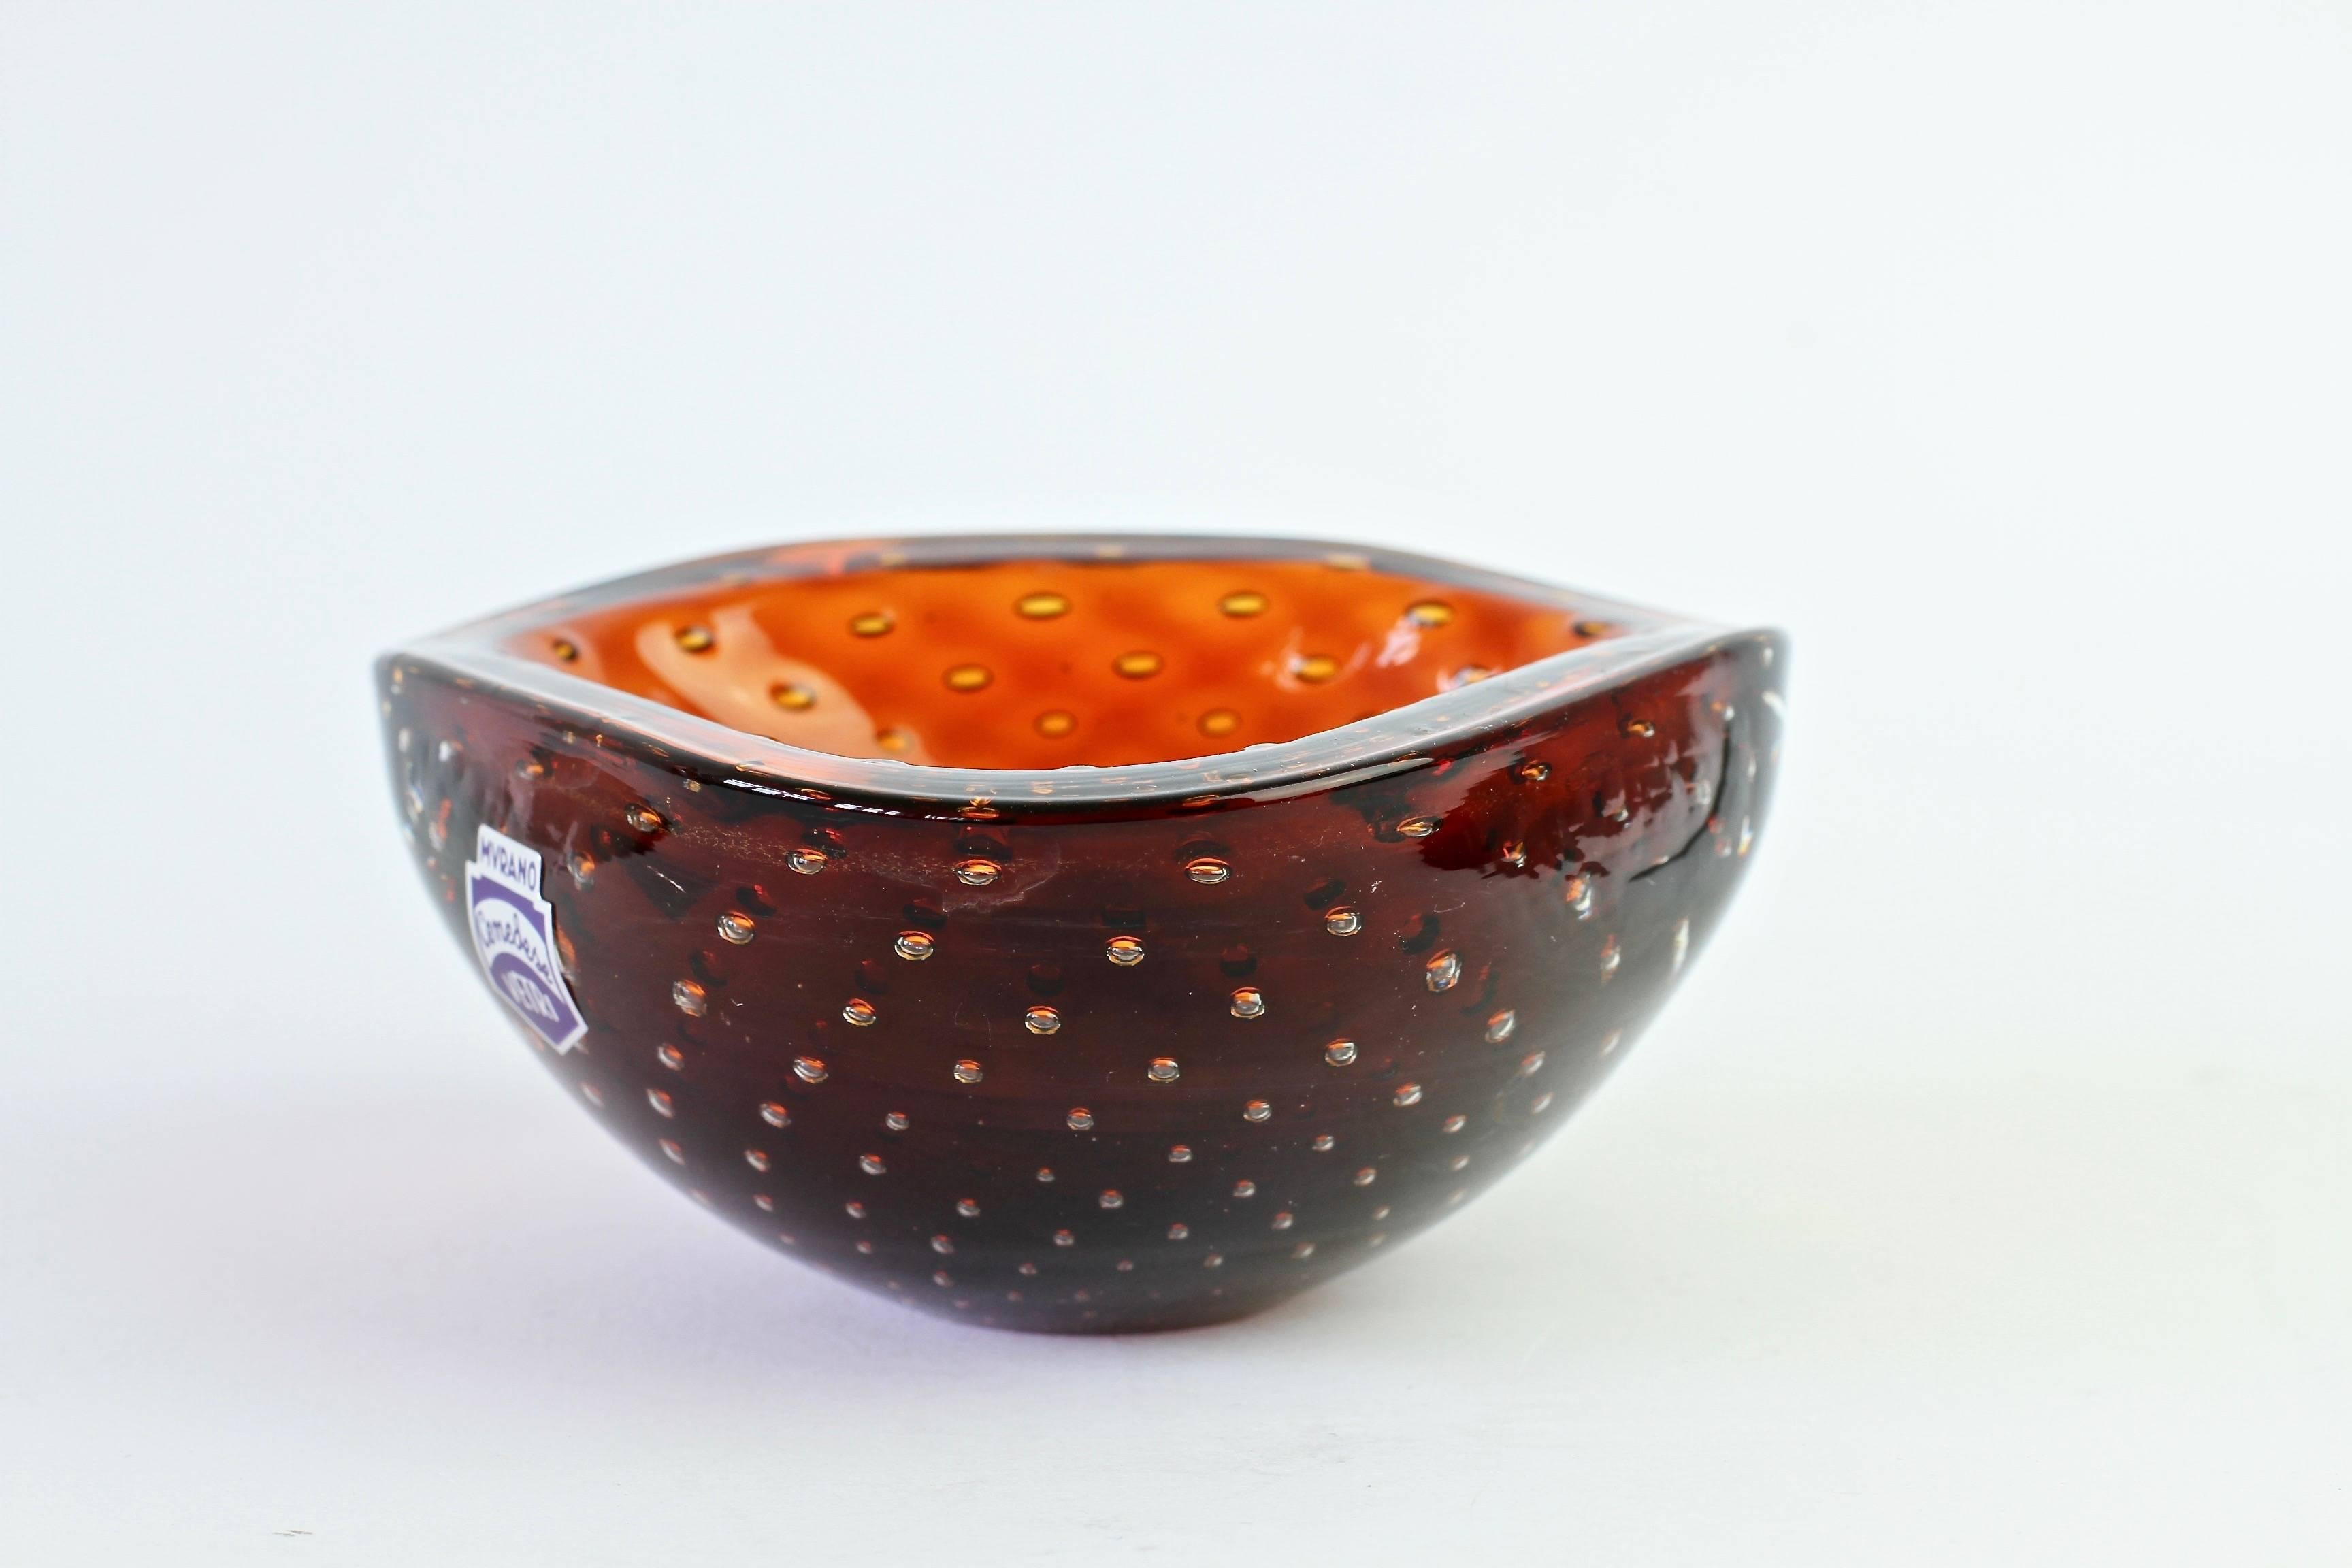 Small petite little Italian bowl or ashtray in the style of Venini by Cenedese. Made from amber colored / coloured Murano glass bullicante or 